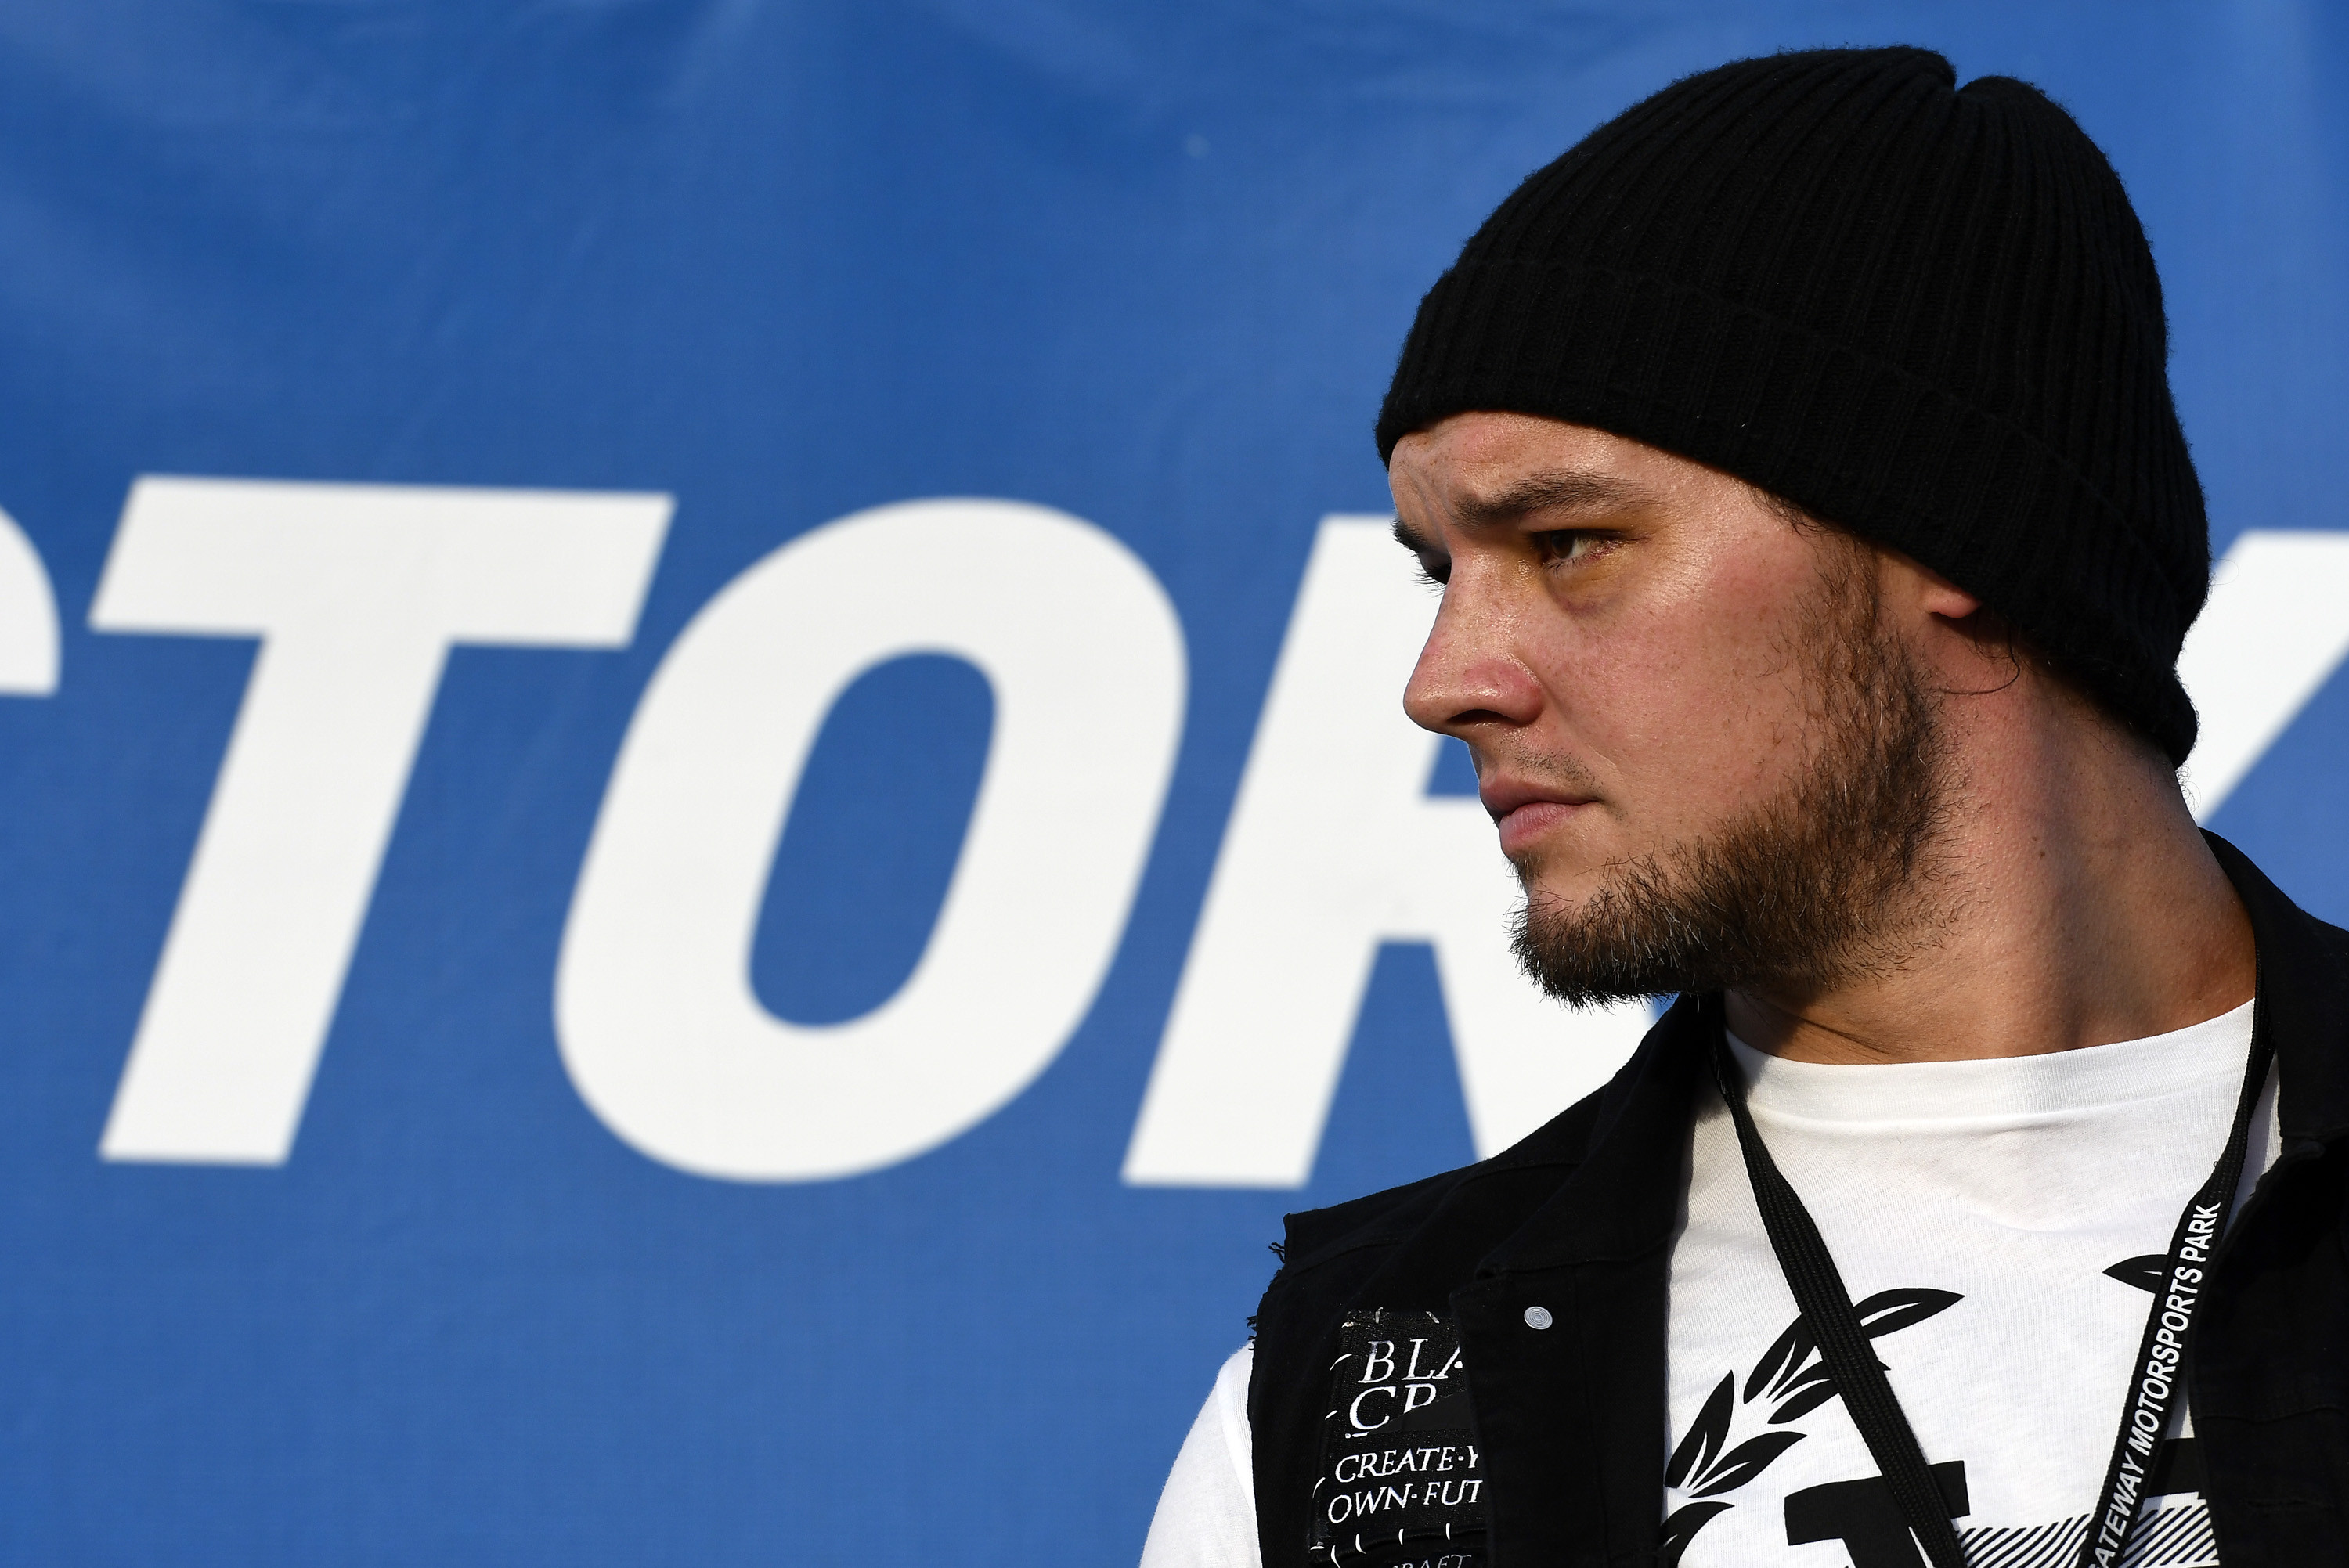 MADISON, IL - JUNE 17: WWE superstar Baron Corbin looks on during the per-race festivities for the NASCAR Camping World Truck Series Drivin' for Linemen 200 on June 17, 2017, at Gateway Motorsports Park in Madison, Illinois. (Photo by Michael Allio/Icon Sportswire via Getty Images)